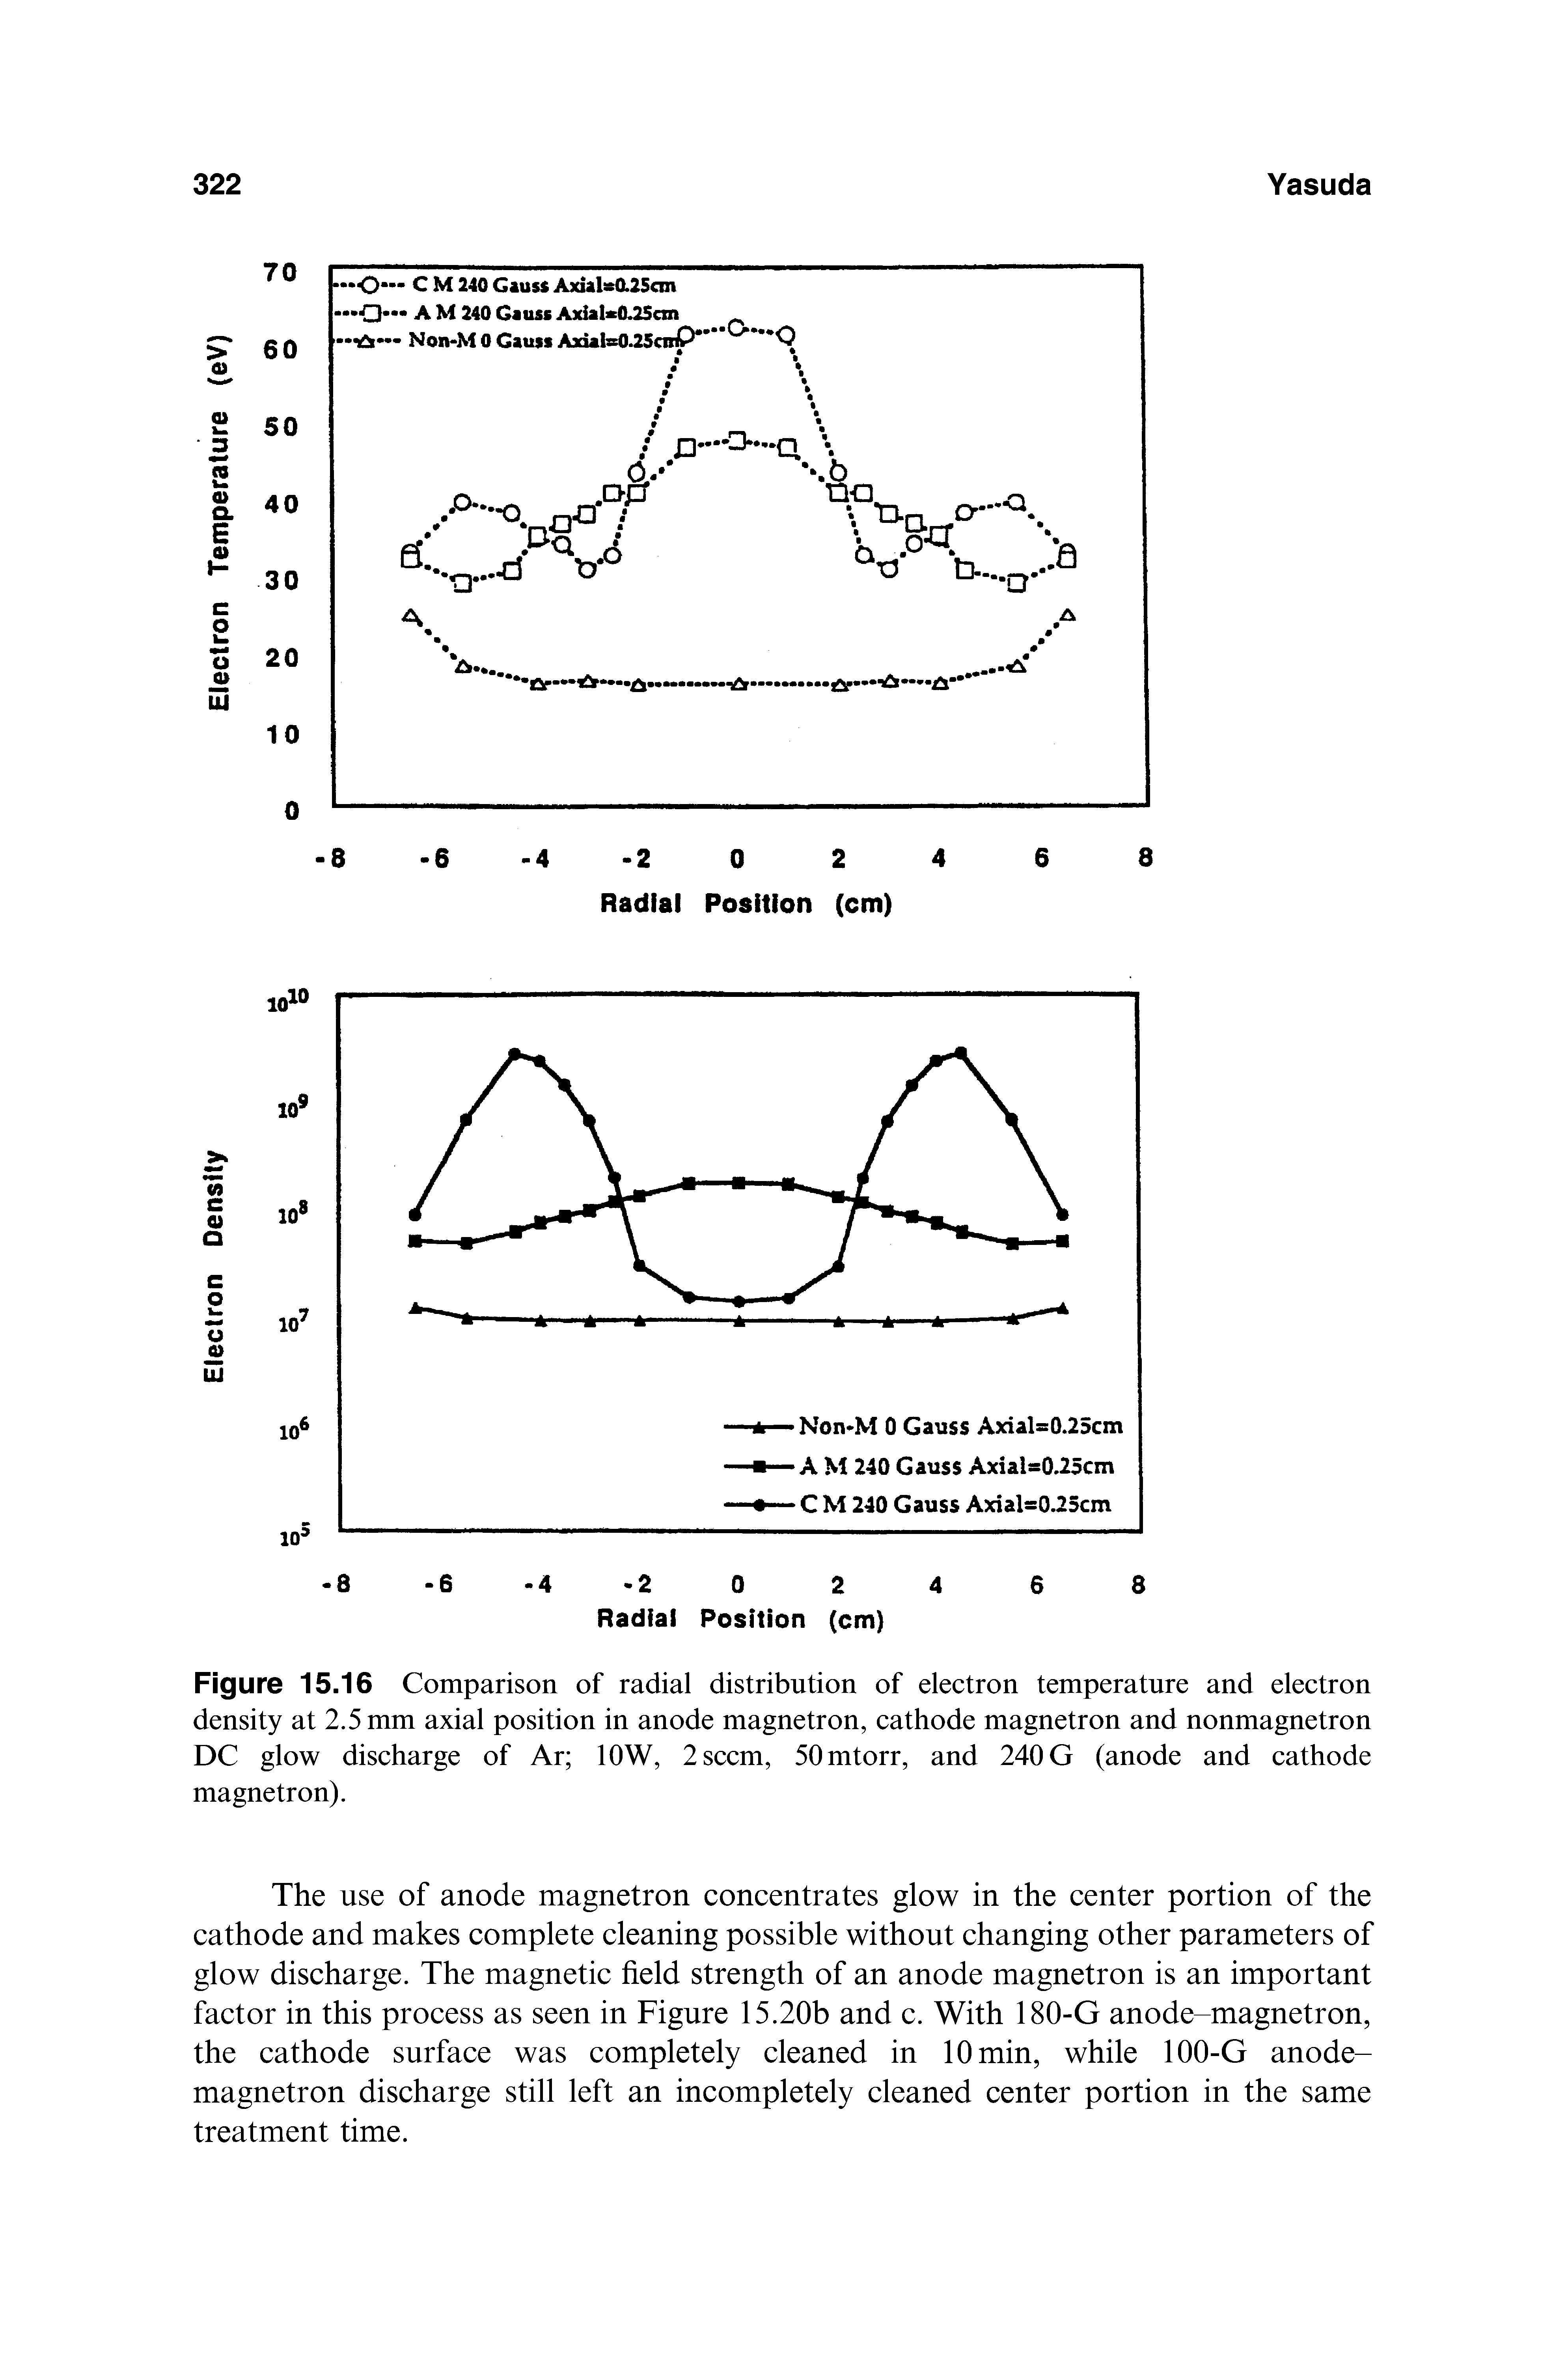 Figure 15.16 Comparison of radial distribution of electron temperature and electron density at 2.5 mm axial position in anode magnetron, cathode magnetron and nonmagnetron DC glow discharge of Ar lOW, 2 seem, SOmtorr, and 240 G (anode and cathode magnetron).